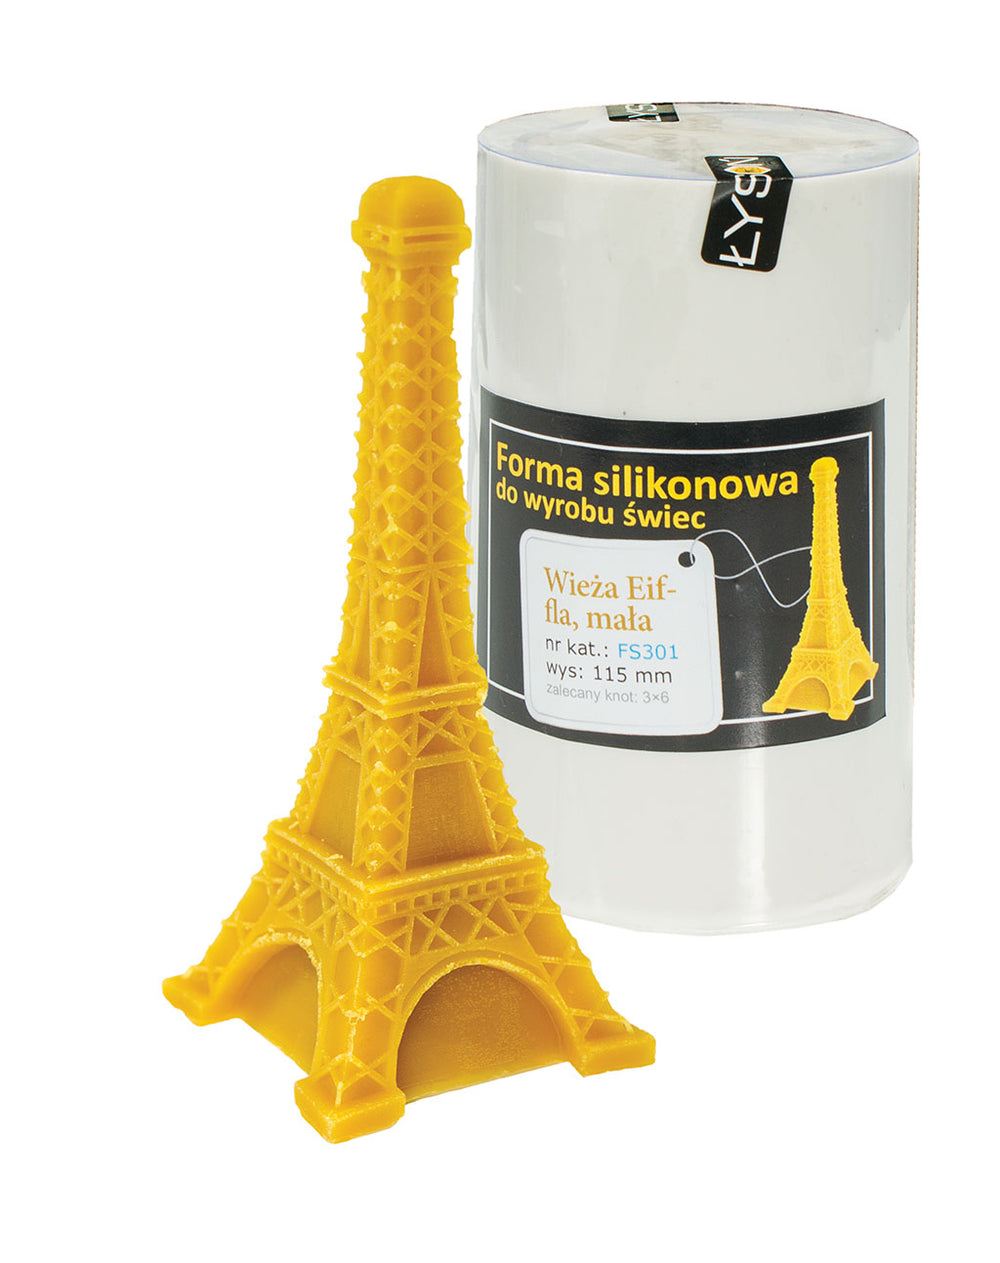 Eiffel Tower Candle Mold, small